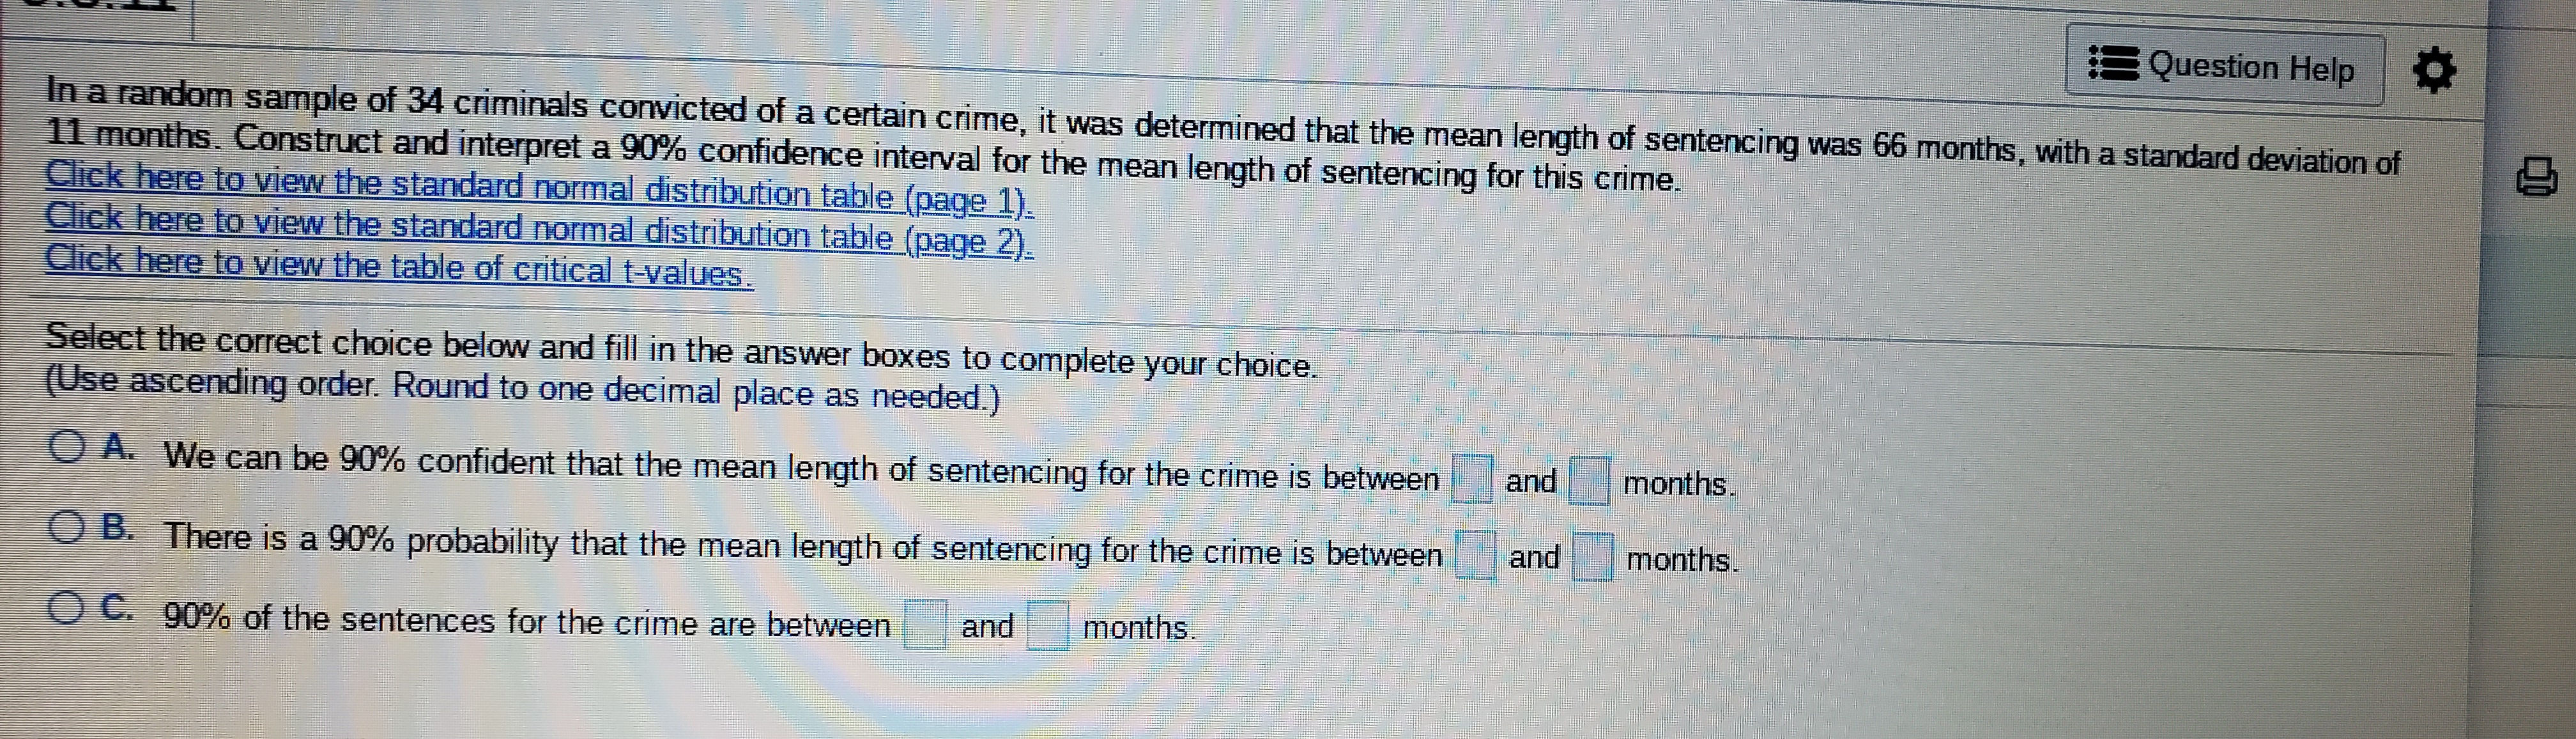 Question Help
In a random sample of 34 criminals convicted of a certain crime, it was determined that the mean length of sentencing was 66 months, with a standard deviation of
11 months. Construct and interpret a 90% confidence interval for the mean length of sentencing for this crime.
Click here to view the standard normal distribution table (page 1).
Click here to view the standard normal distribution table (page 2)
